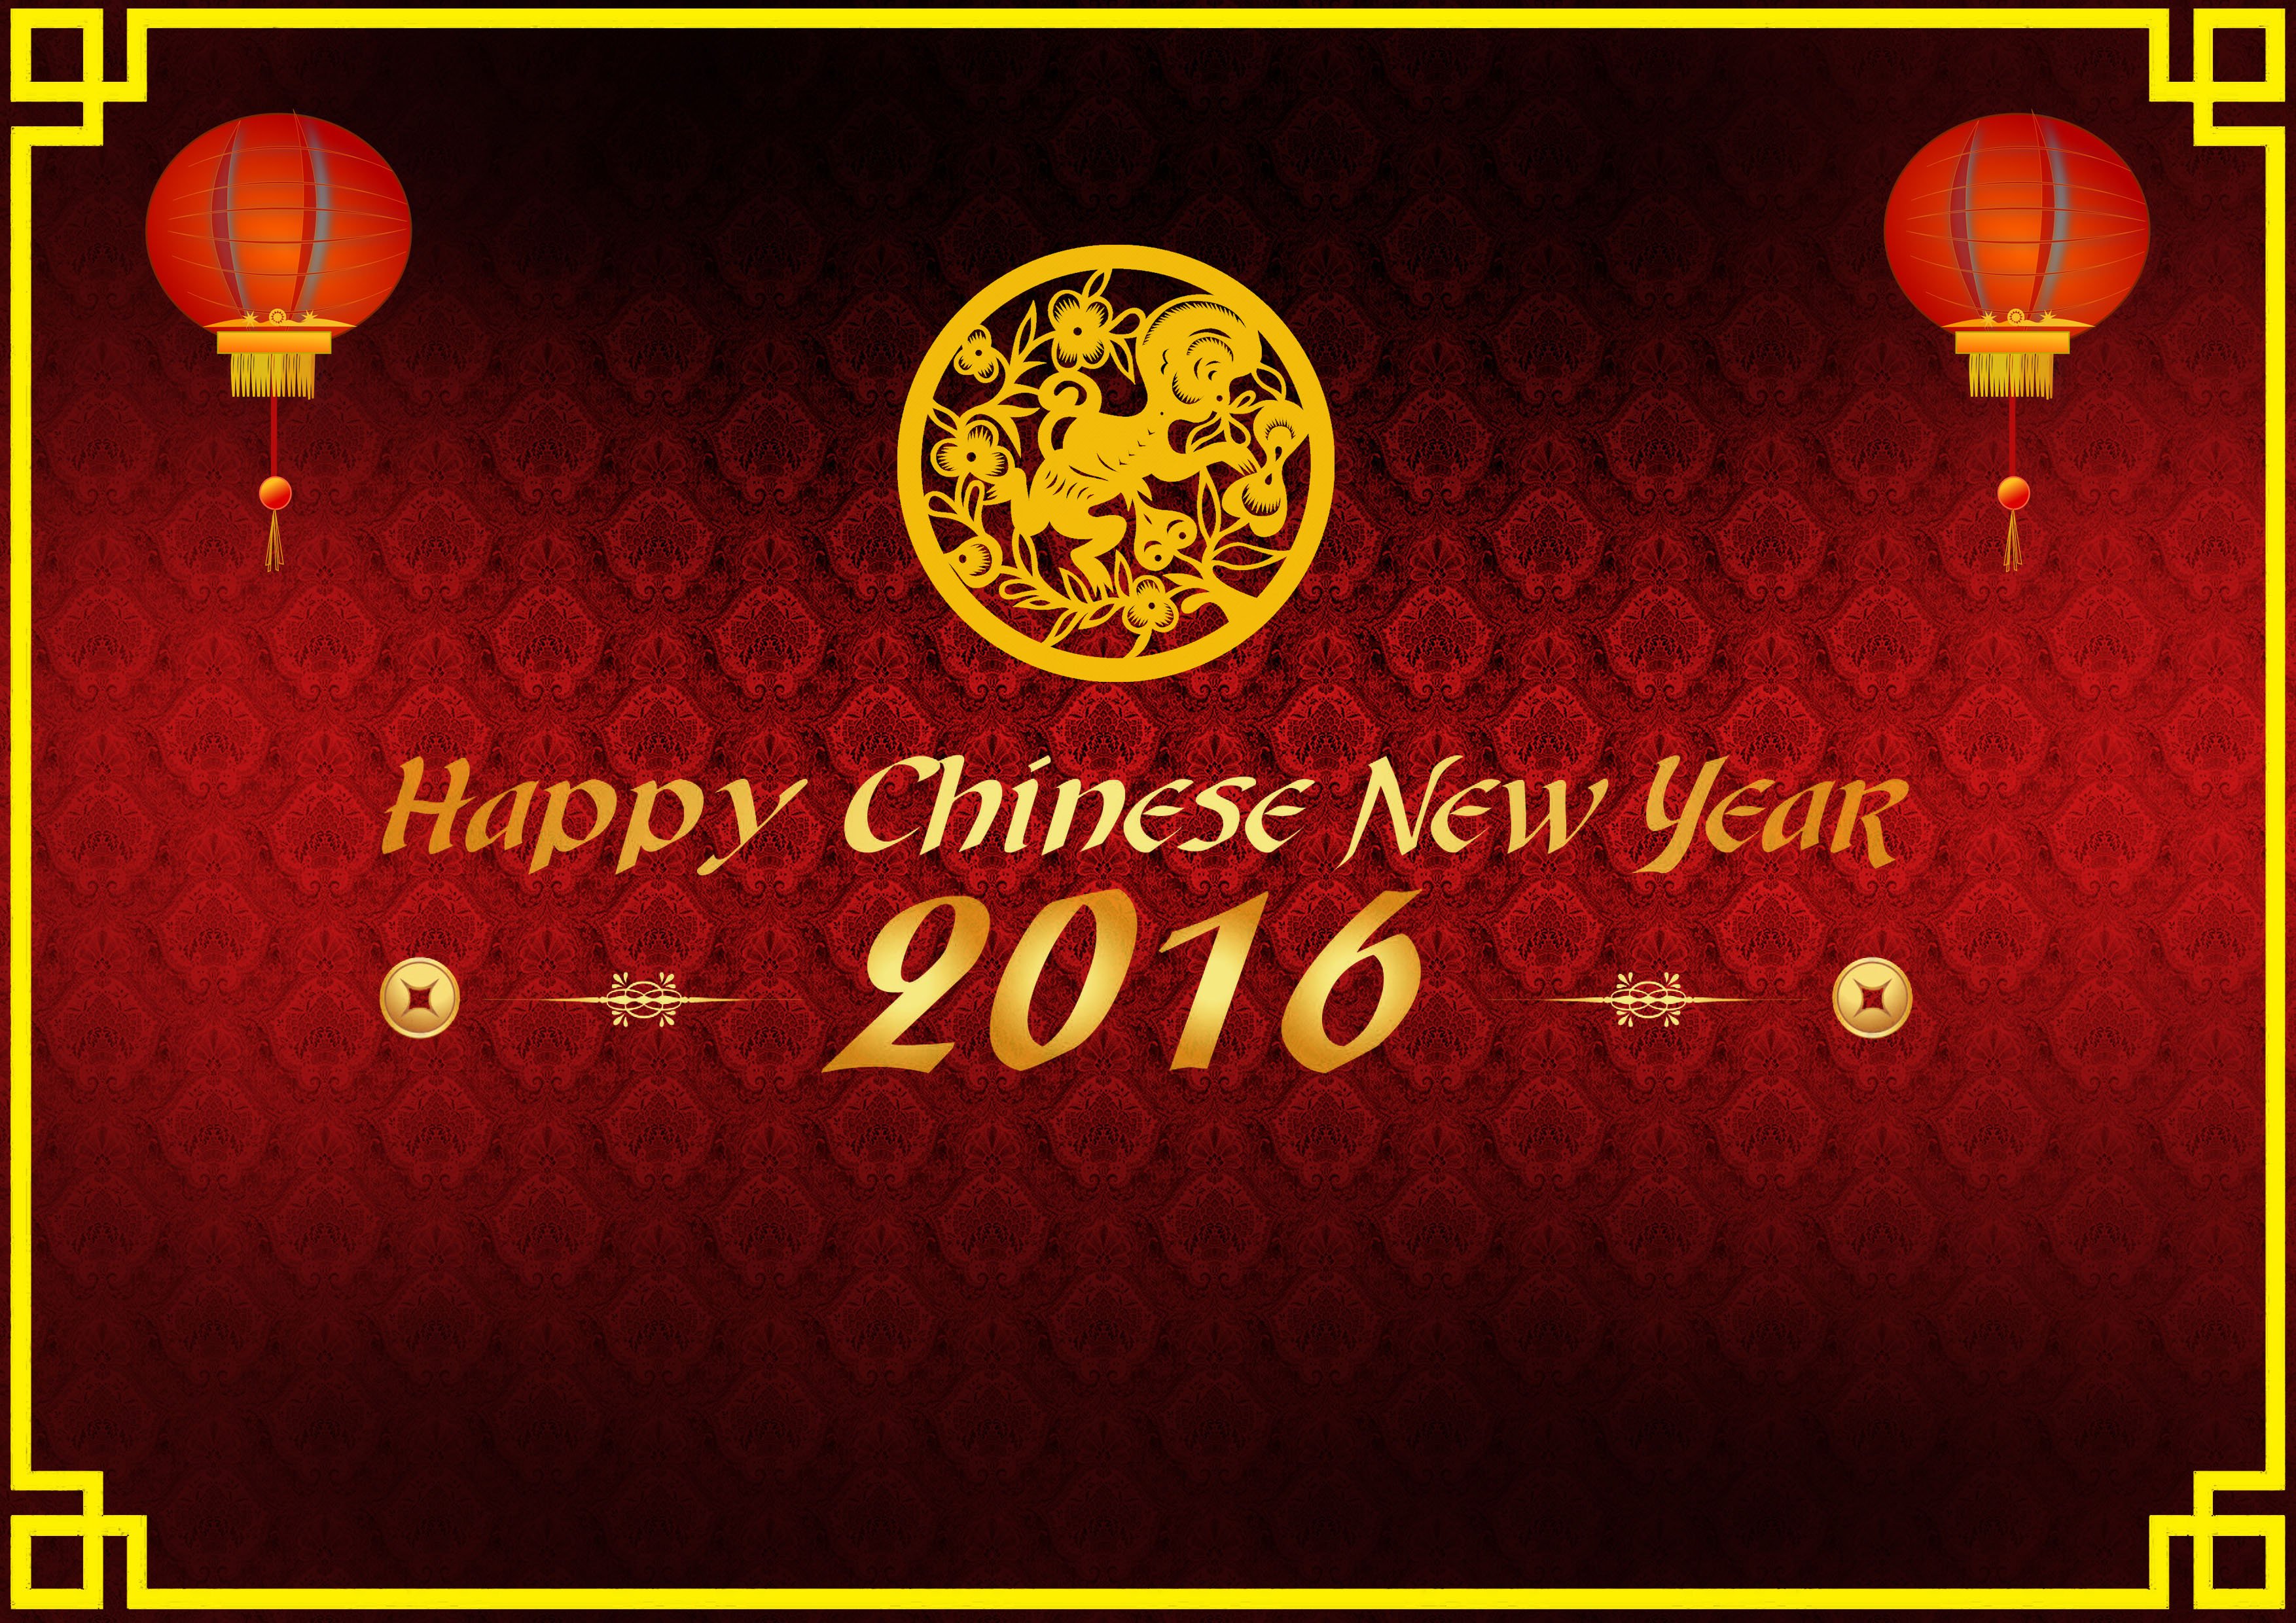 Chinese New Year 2016 Wallpaper Year of Monkey HD Wallpapers for